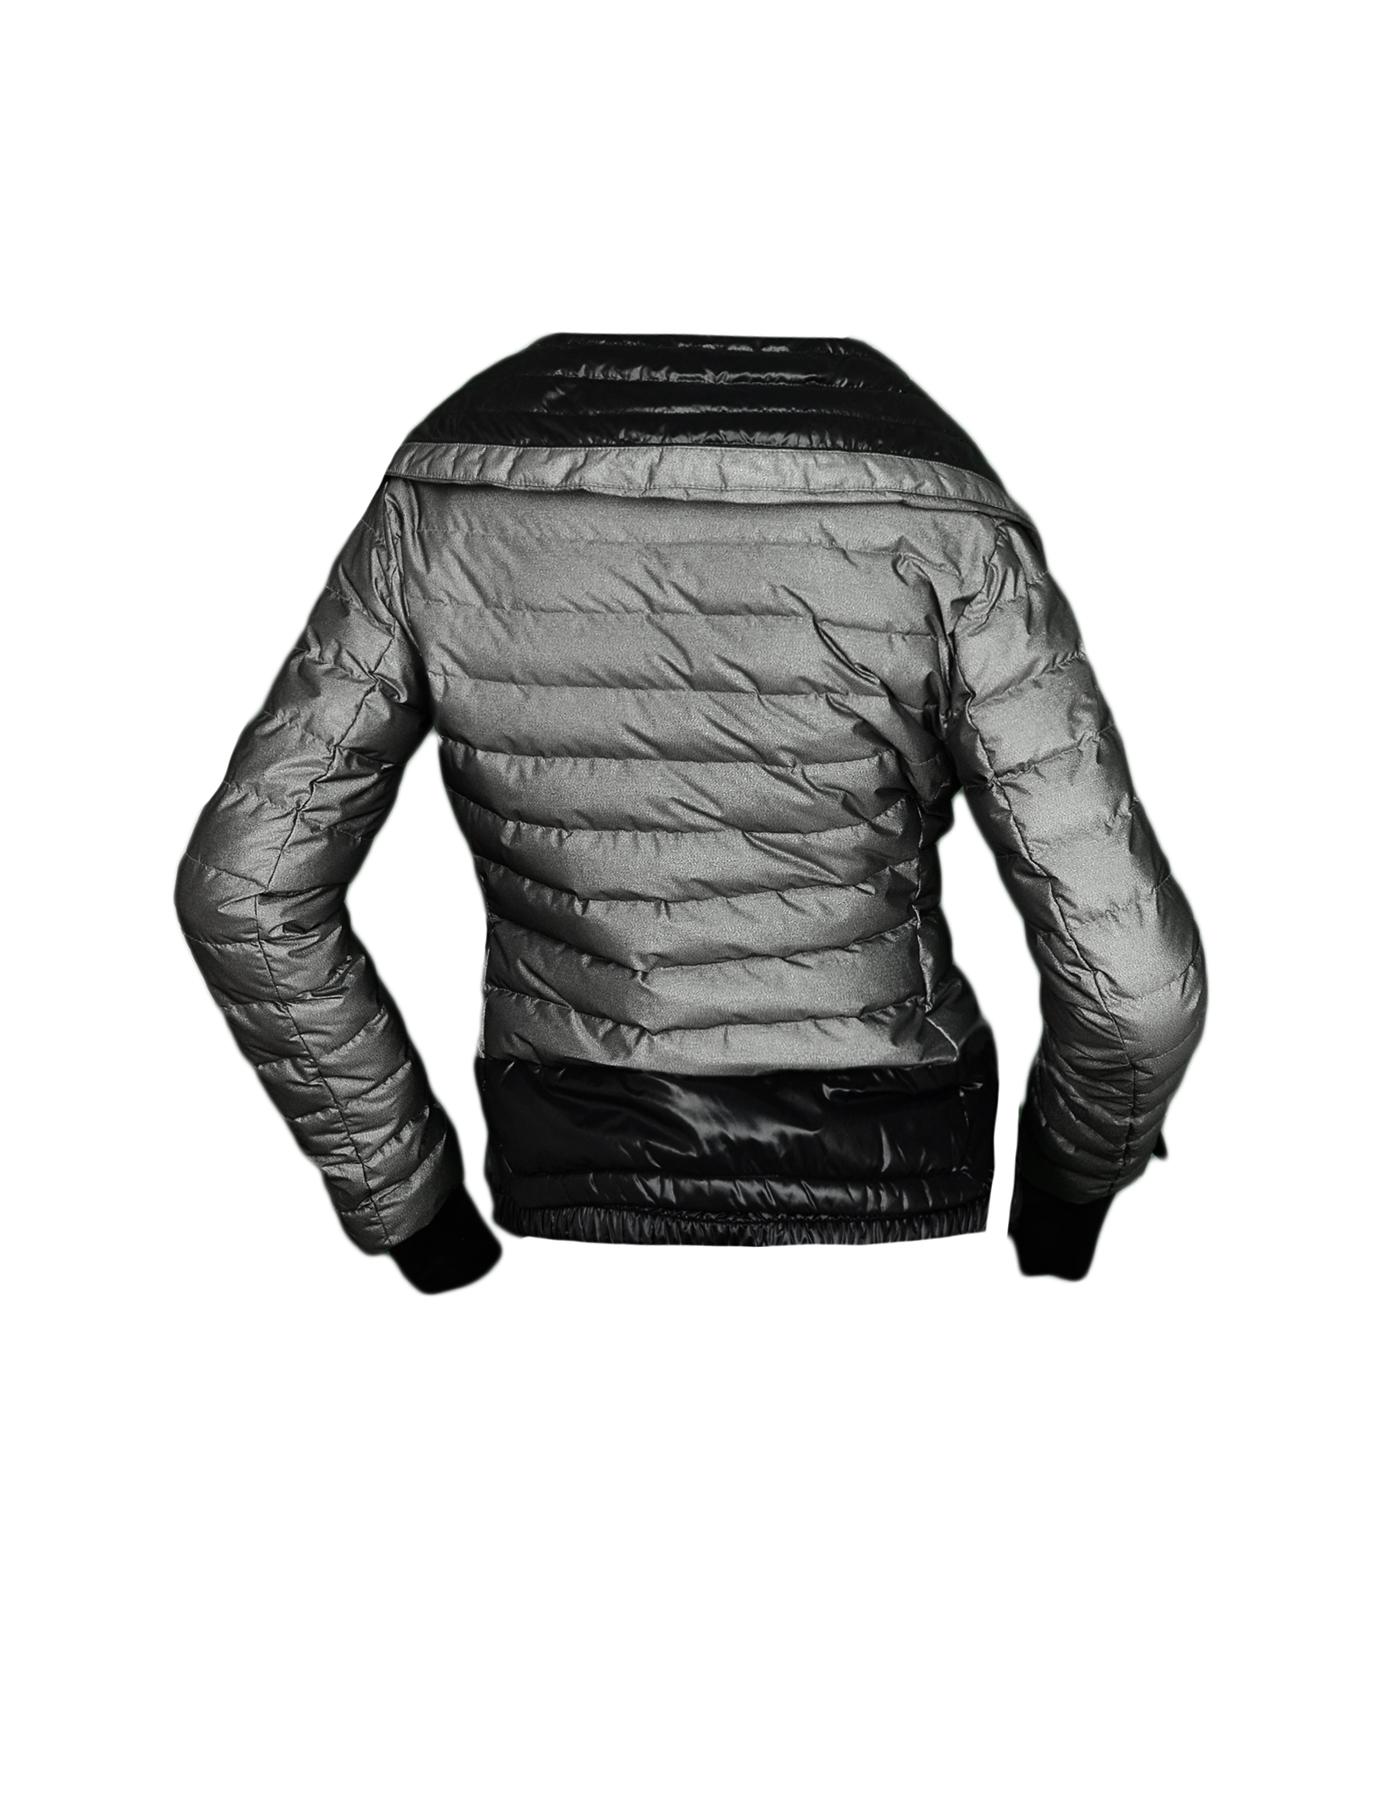 Moncler Silver Down Puffer Jacket sz 0

Made In: Romania
Color: Silver, Black
Materials: 86% Polyester, 14% Polyamide
Lining: 100% Nylon
Filling: 90% Down, 10% Feather
Opening/Closure: Front zip
Overall Condition: Excellent pre-owned condition

Tag